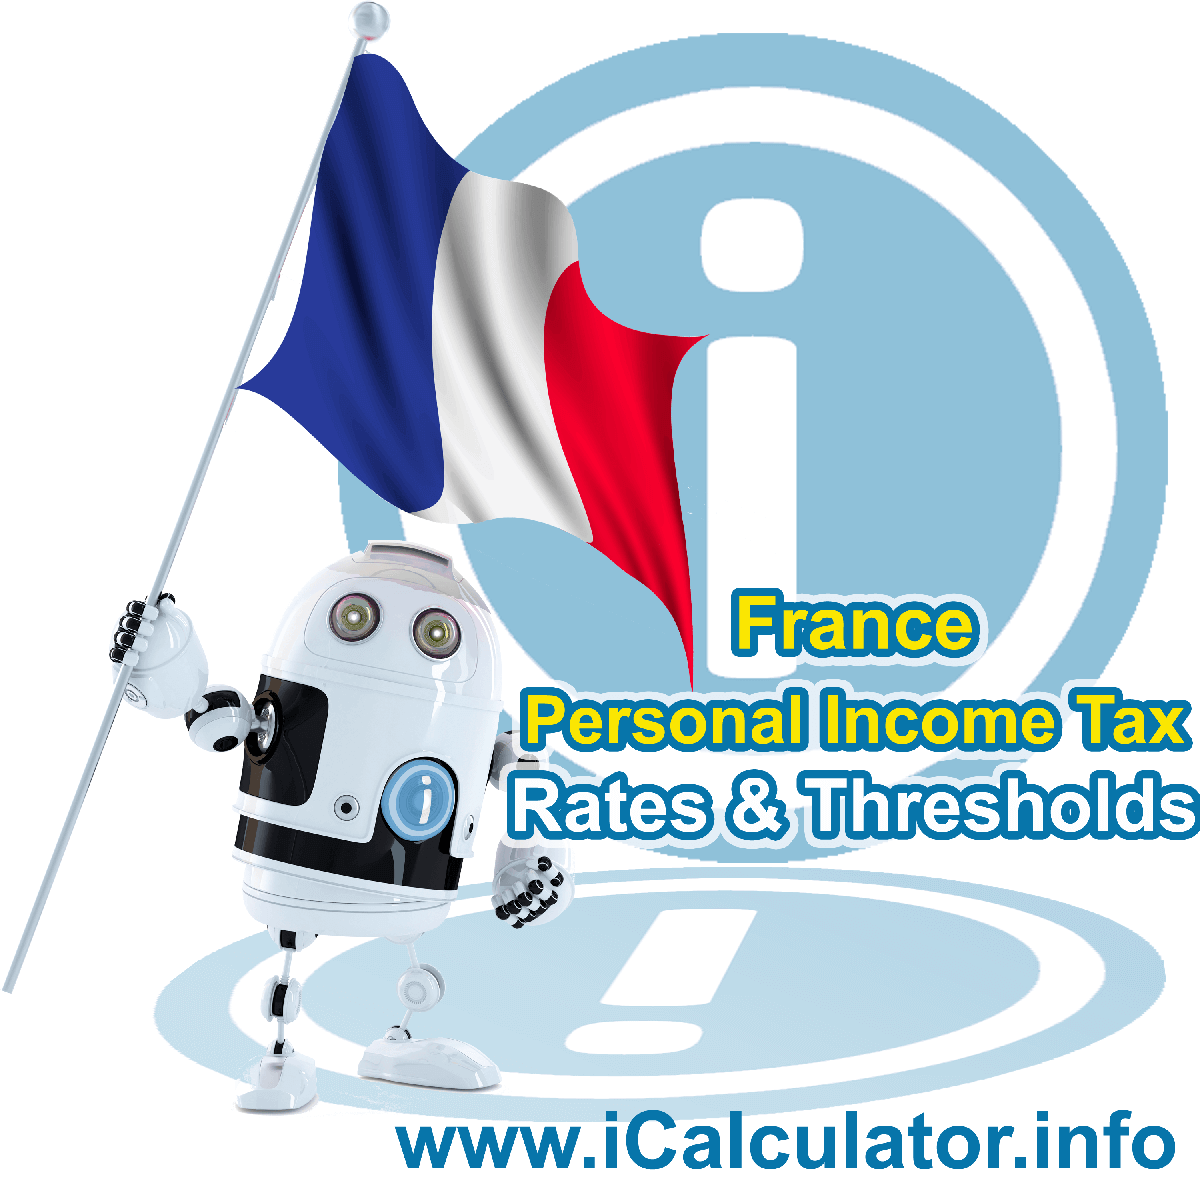 France Personal Income Tax Rates and Allowances in 2021. This image shows the France flag and information relating to the income tax formula and payroll formulas used for calculating income Tax in France using the France personal income tax rates, thresholds and allowances in 2023